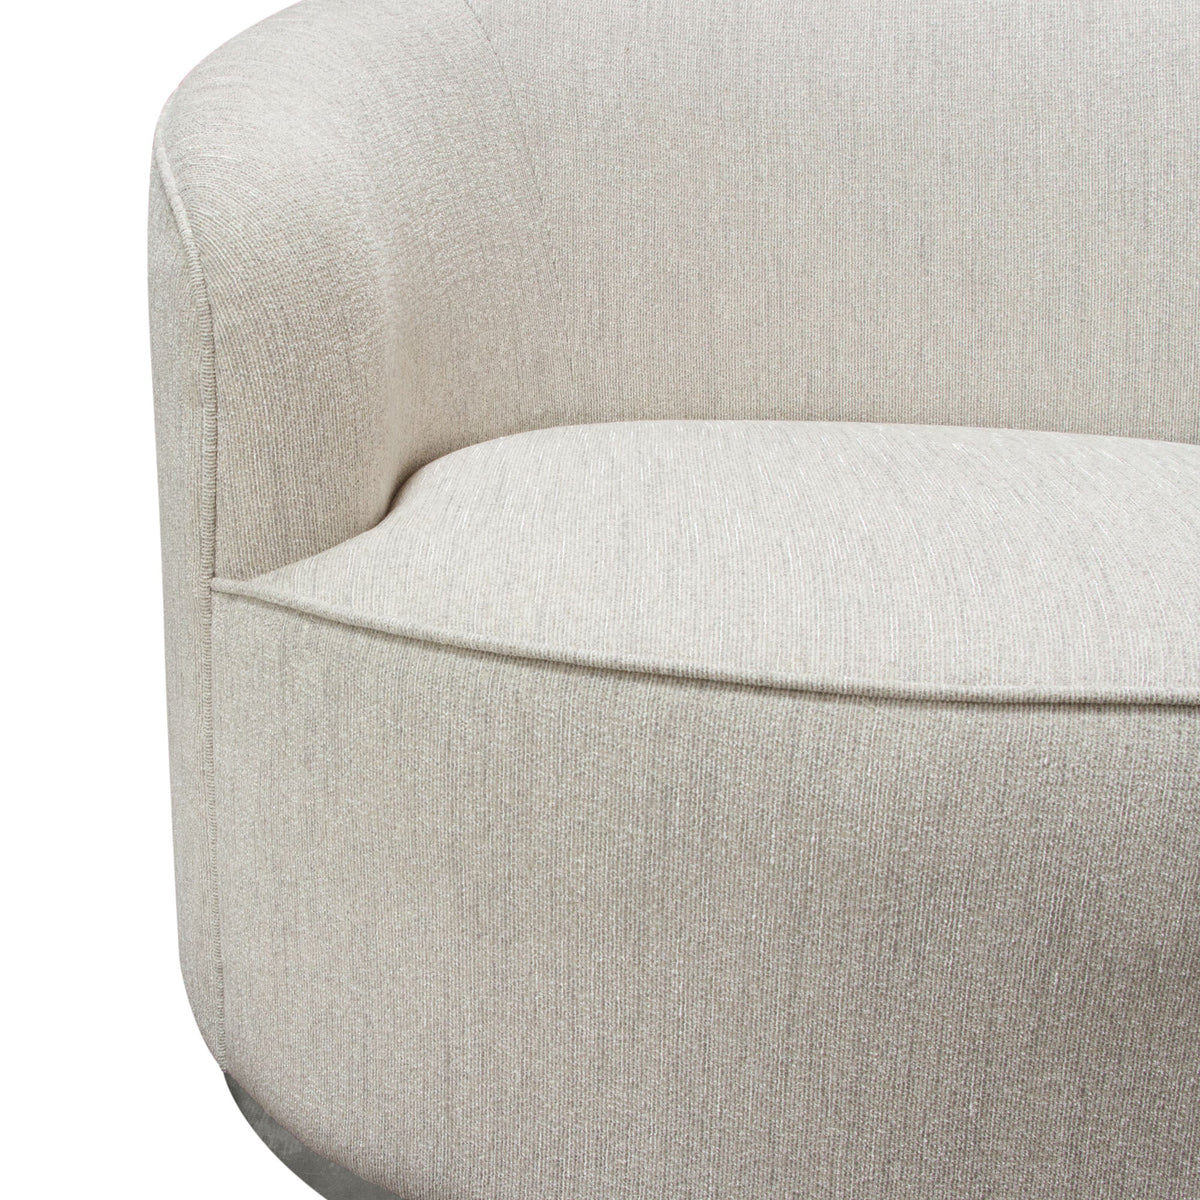 Anastasia Light Cream with Brushed Silver Chair - Luxury Living Collection